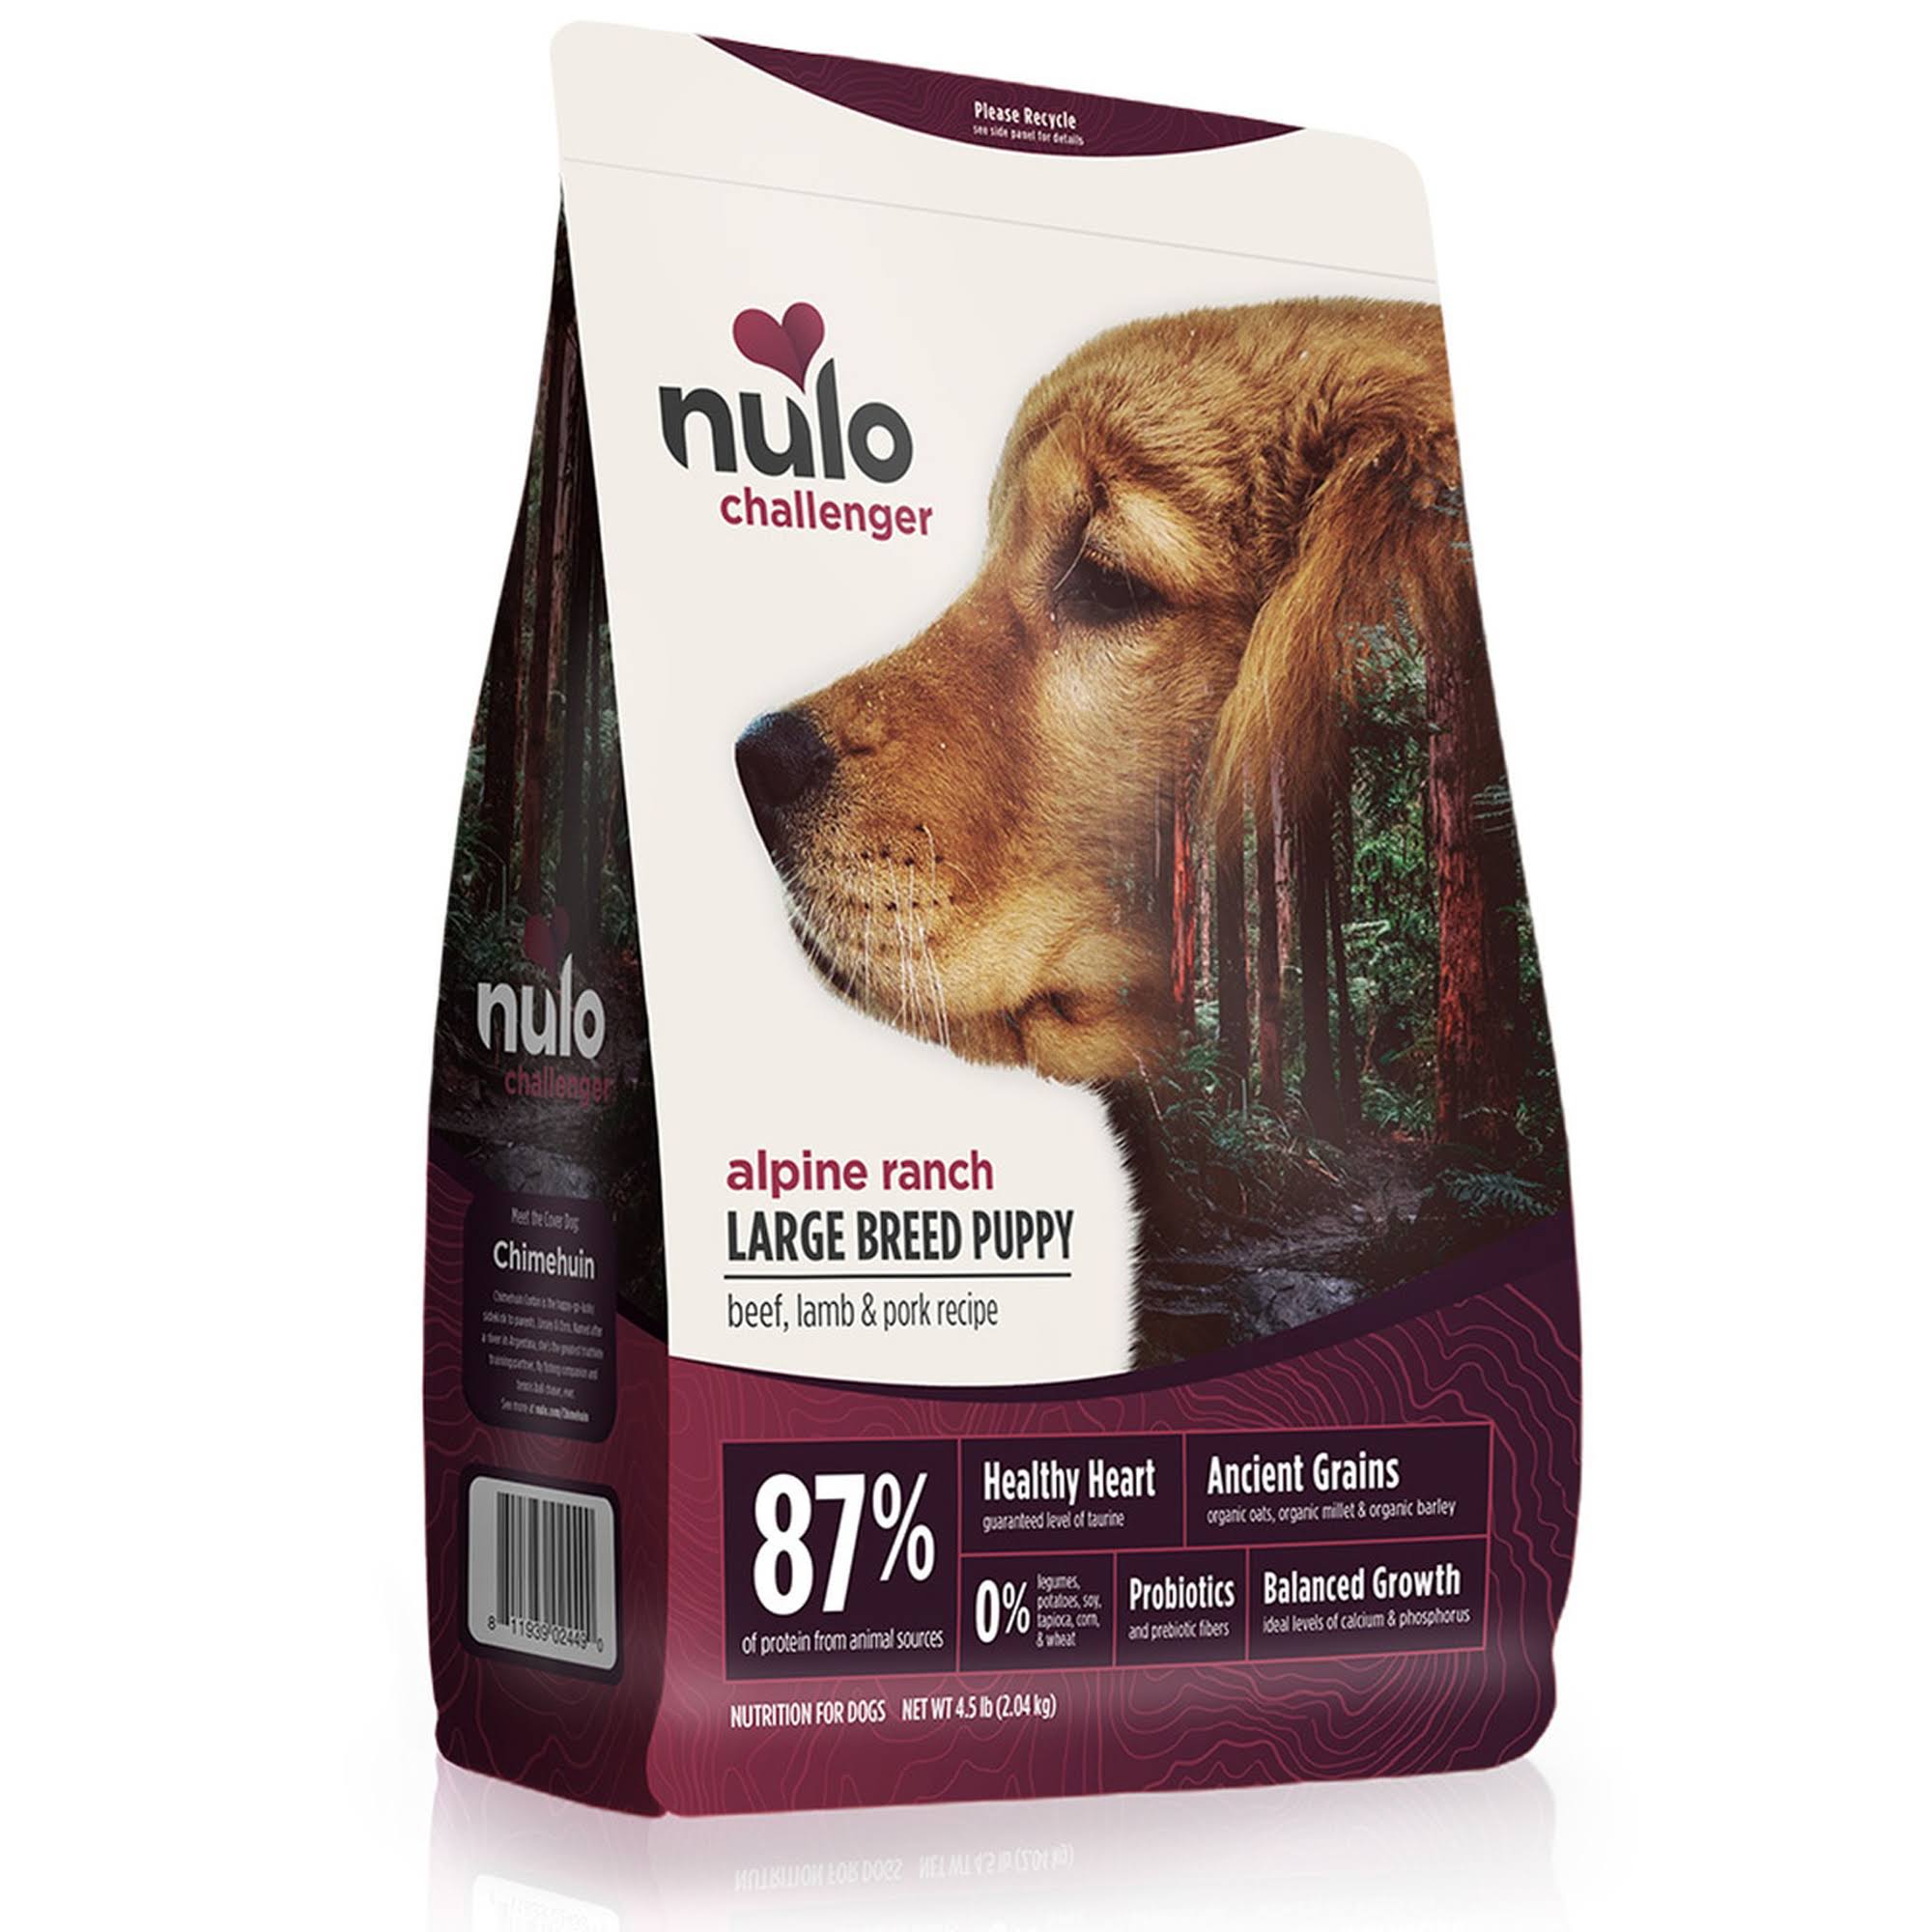 Nulo Challenger Large Breed Puppy Beef Lamb & Pork Recipe 11lb